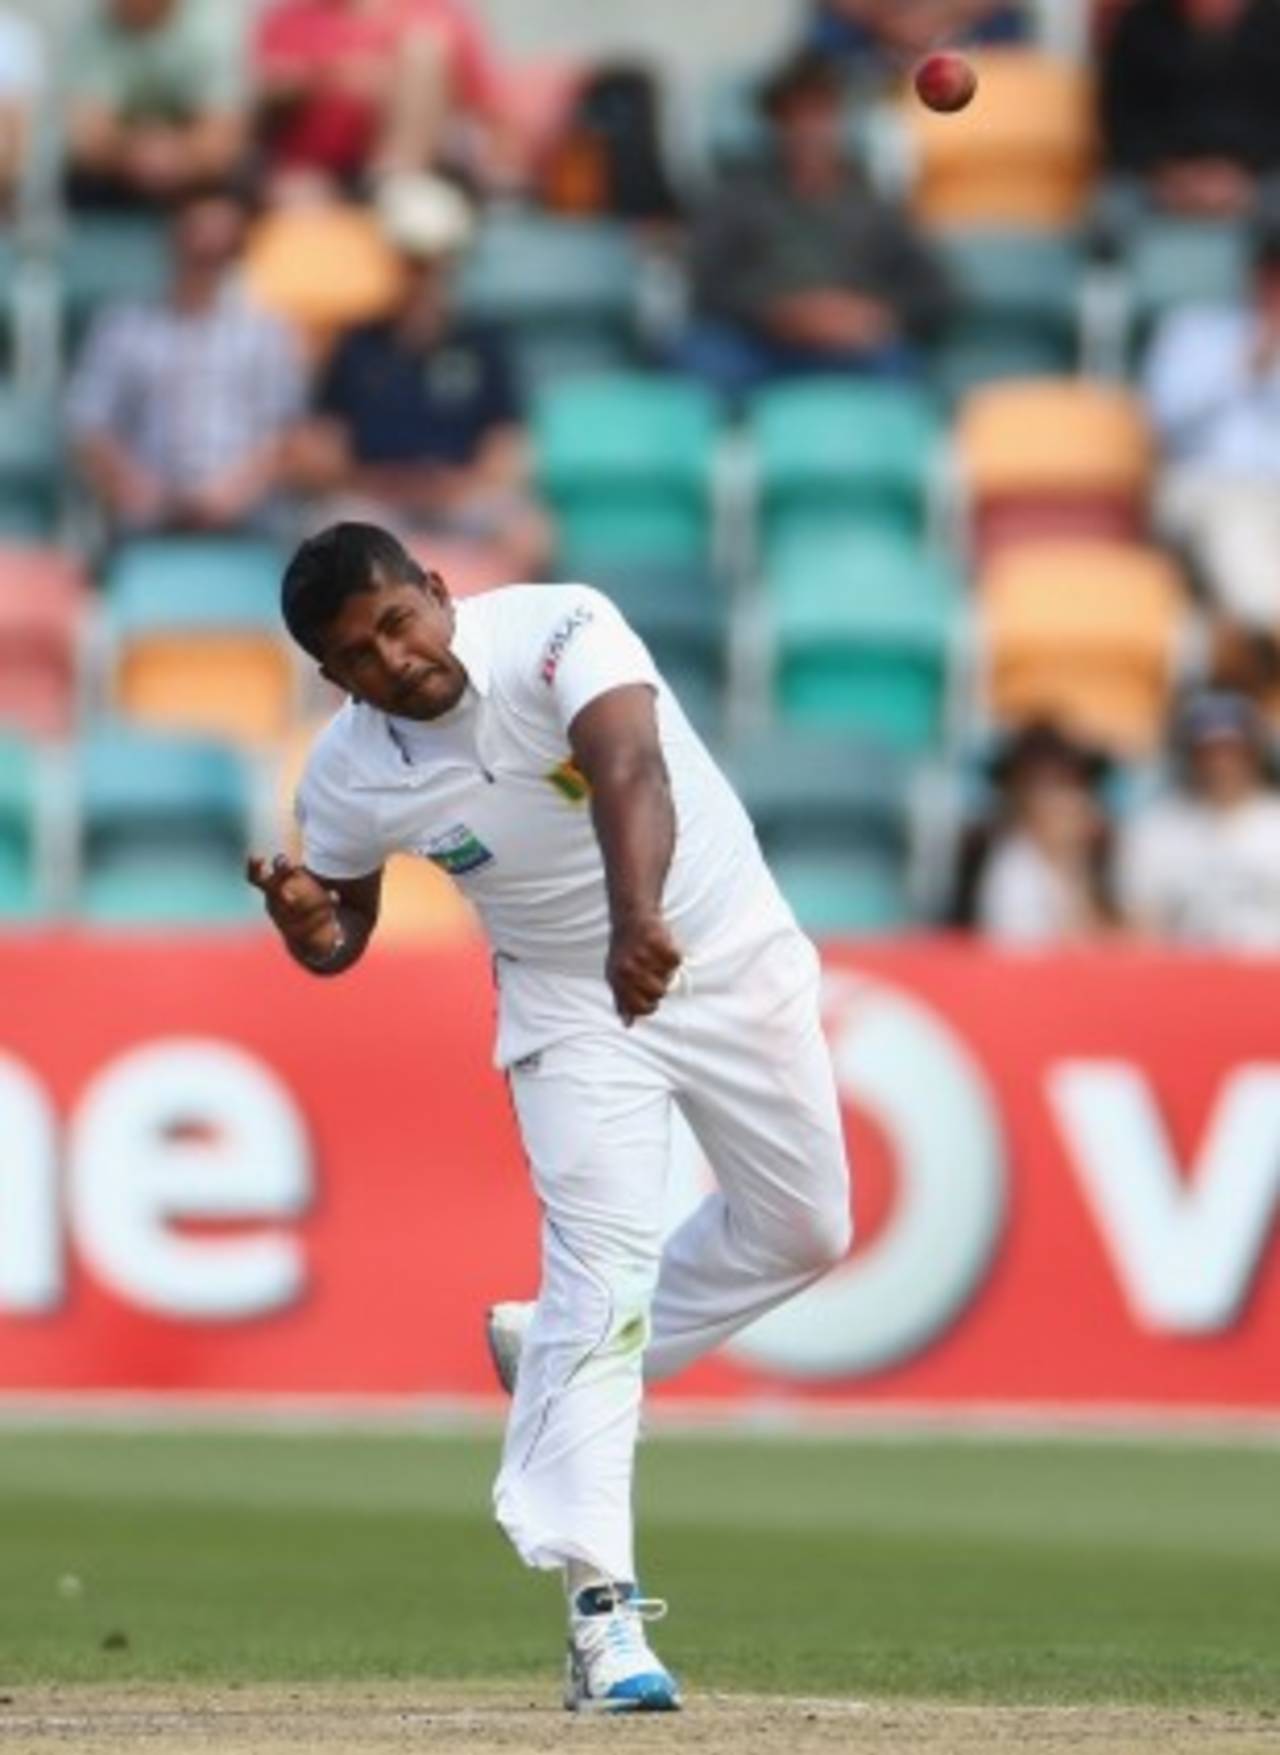 Despite being their premier bowler in the last 12 months, Rangana Herath seemingly hasn't been Sri Lanka's go-to bowler on this tour&nbsp;&nbsp;&bull;&nbsp;&nbsp;Getty Images